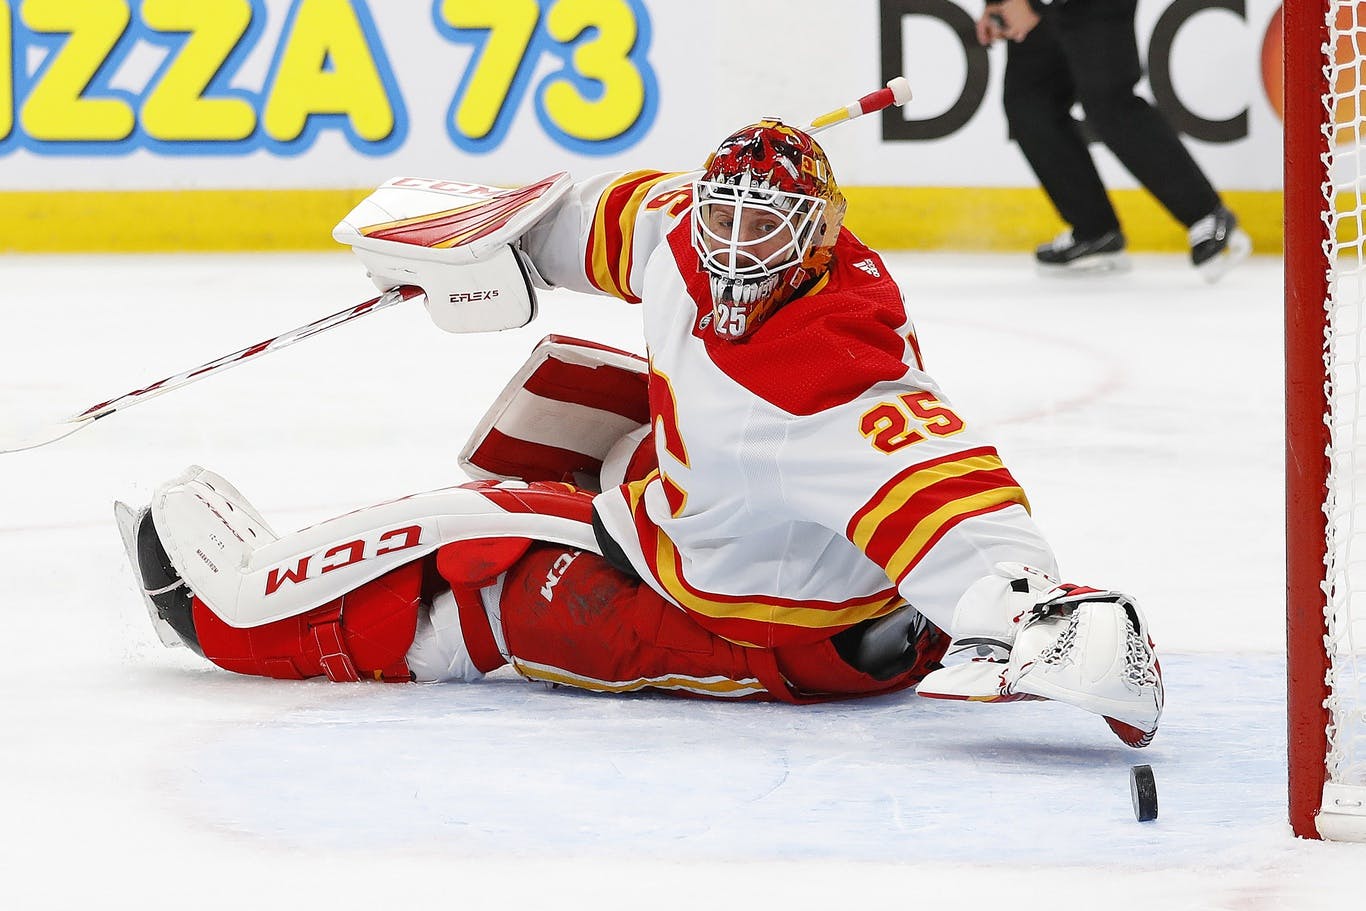 Jacob Markstrom of the Calgary Flames during a break in play